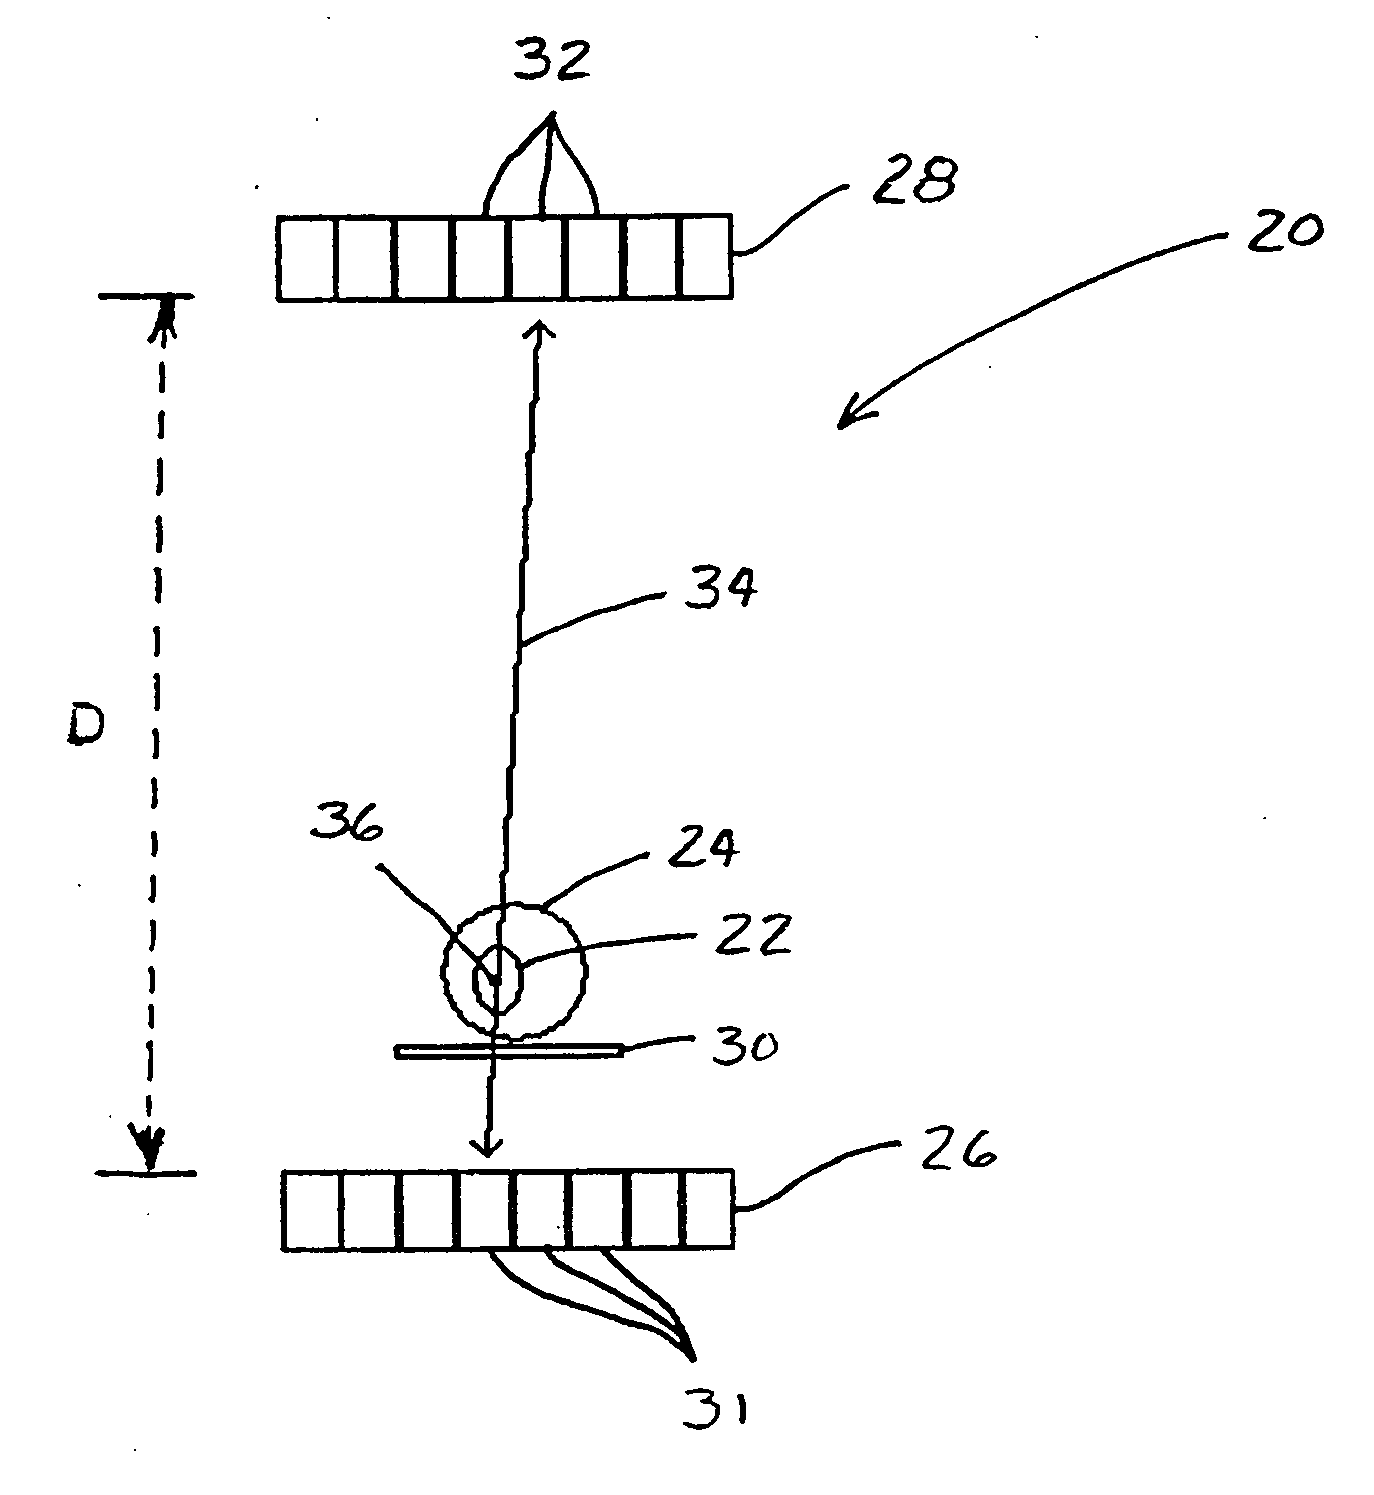 Method and apparatus for increasing spatial resolution of a pet scanner